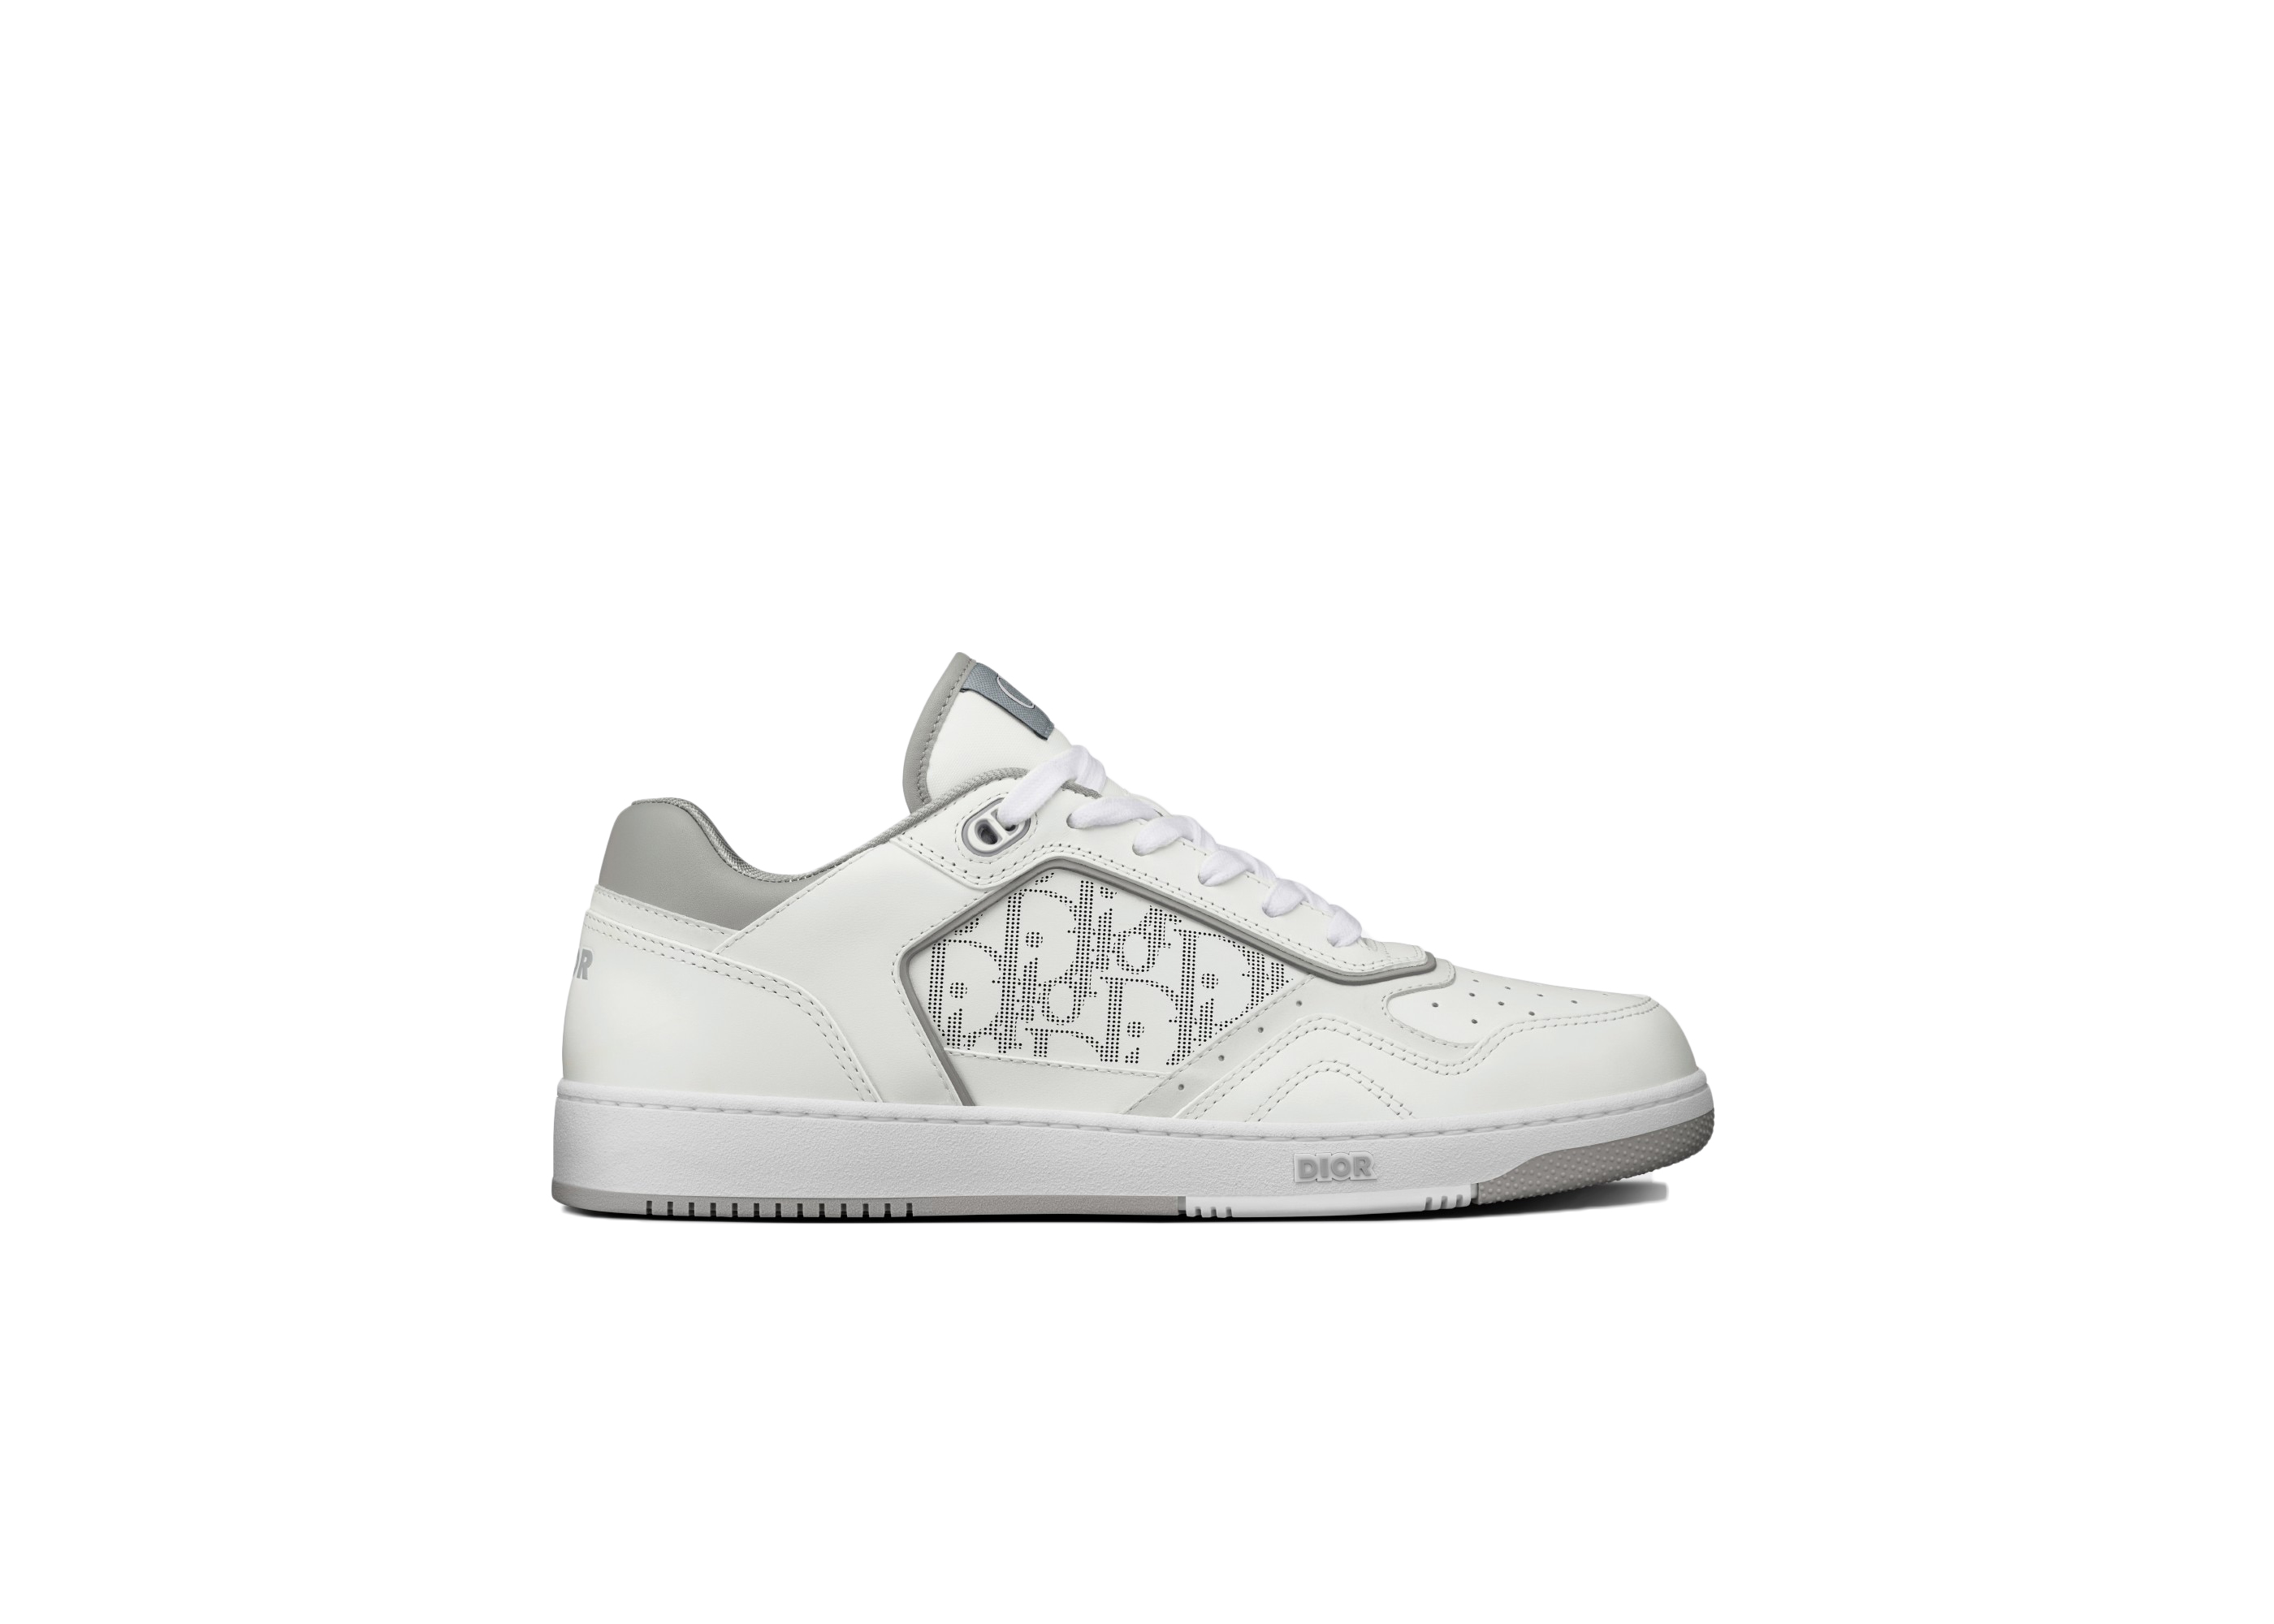 B27 LowTop Sneaker White Smooth Calfskin and Dior Oblique Galaxy Leather   DIOR VN